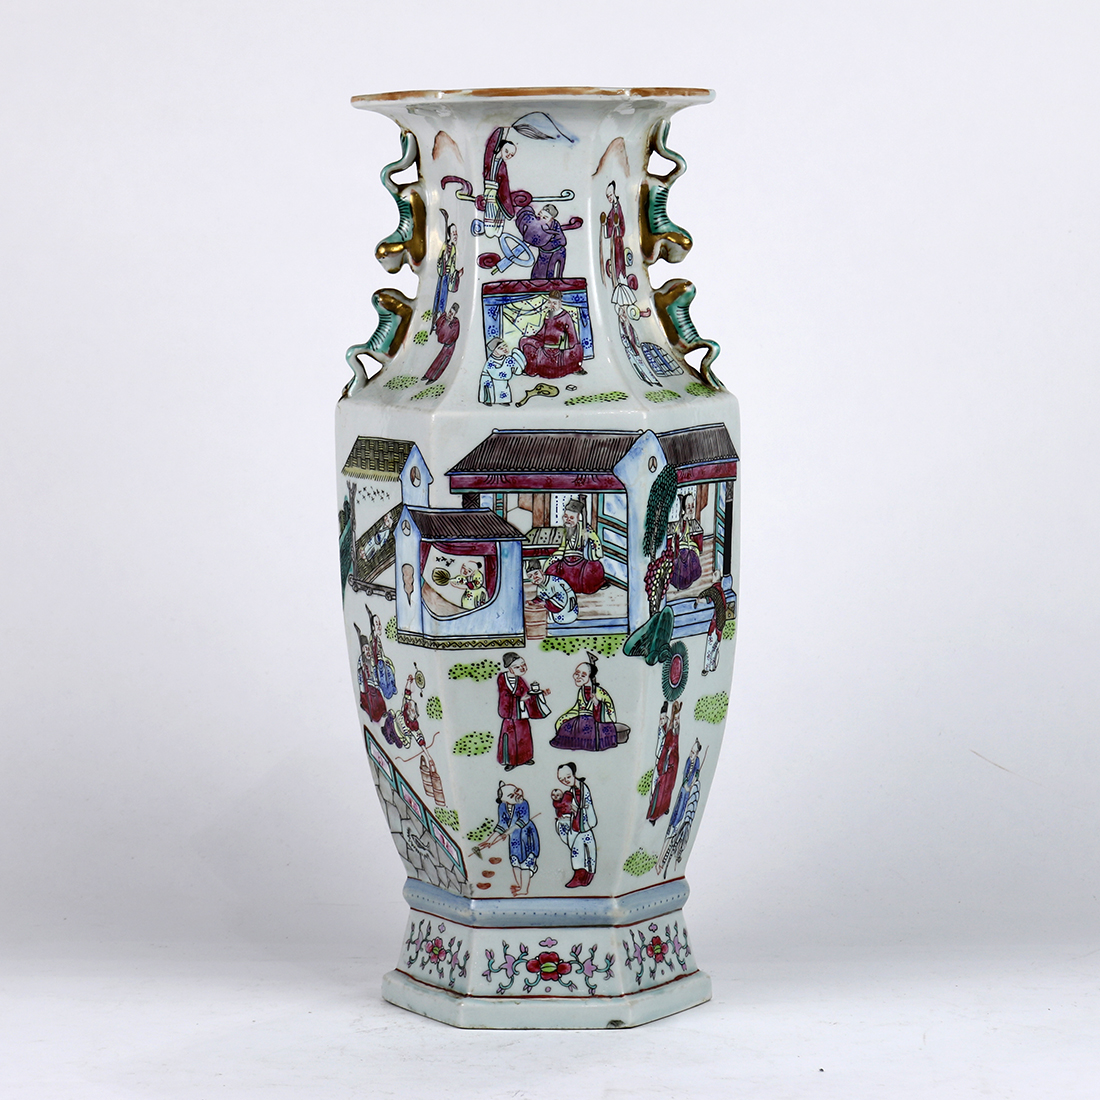 Chinese enameled porcelain vase, of hexagonal shape decorated with village scenes of figures in